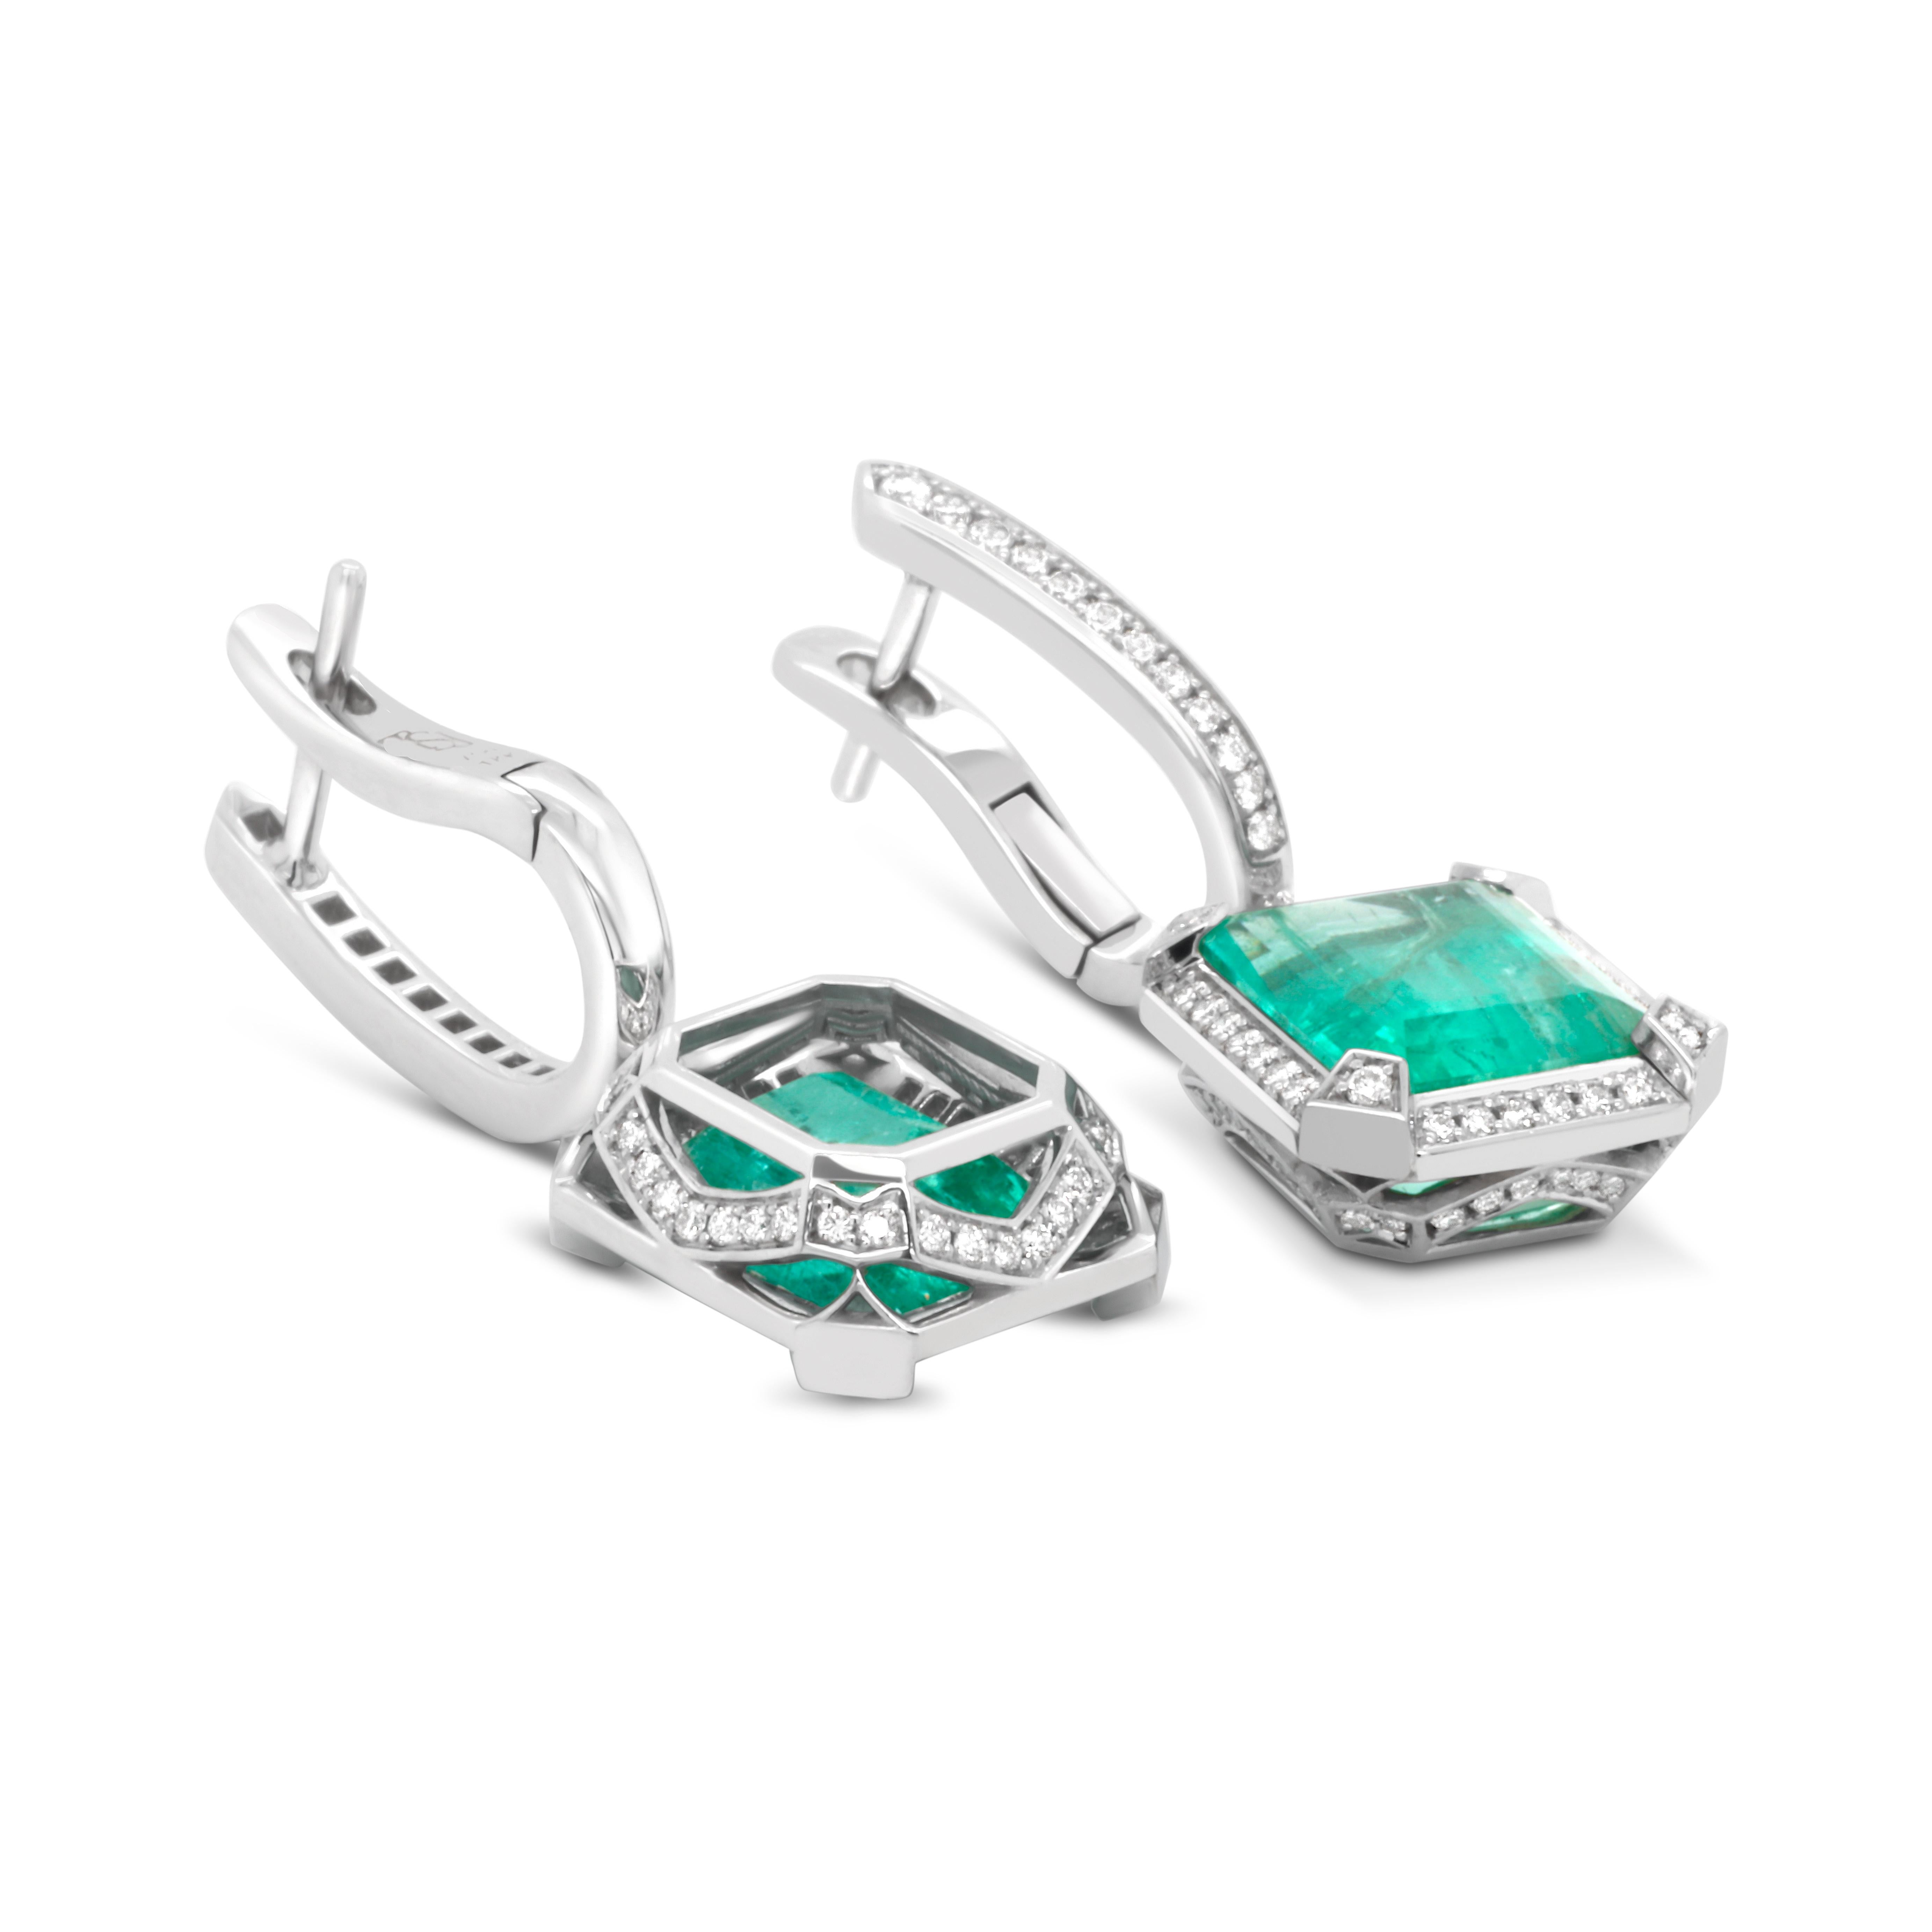 Classic 18K White Gold Earrings. Center stones are pleasing certified no-oil Russian Emeralds 7.01 ct surrounded by White Diamonds 0.76 ct total weight. Timeless design and absolute perfection.
This Earrings are perfectly combined with 5.28 ct